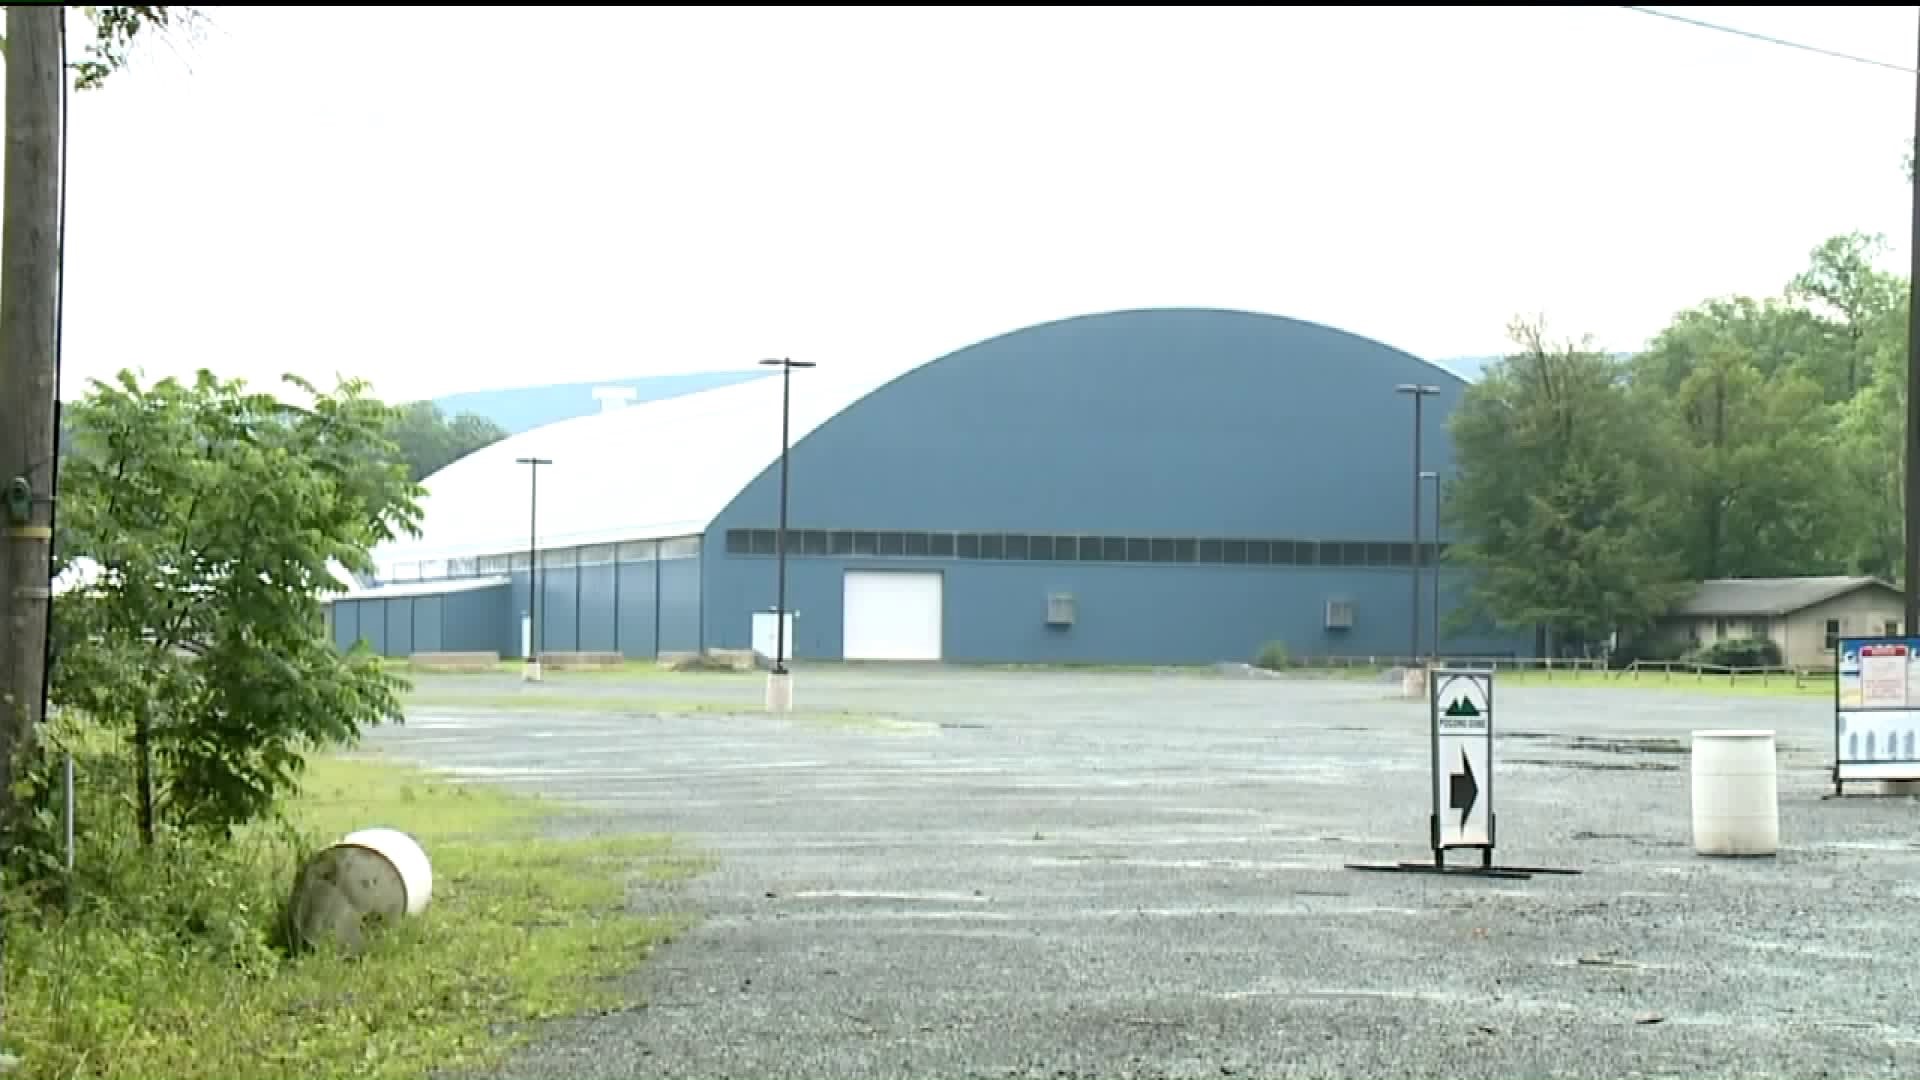 Group Once Again Eyes Pocono Dome for Church Space